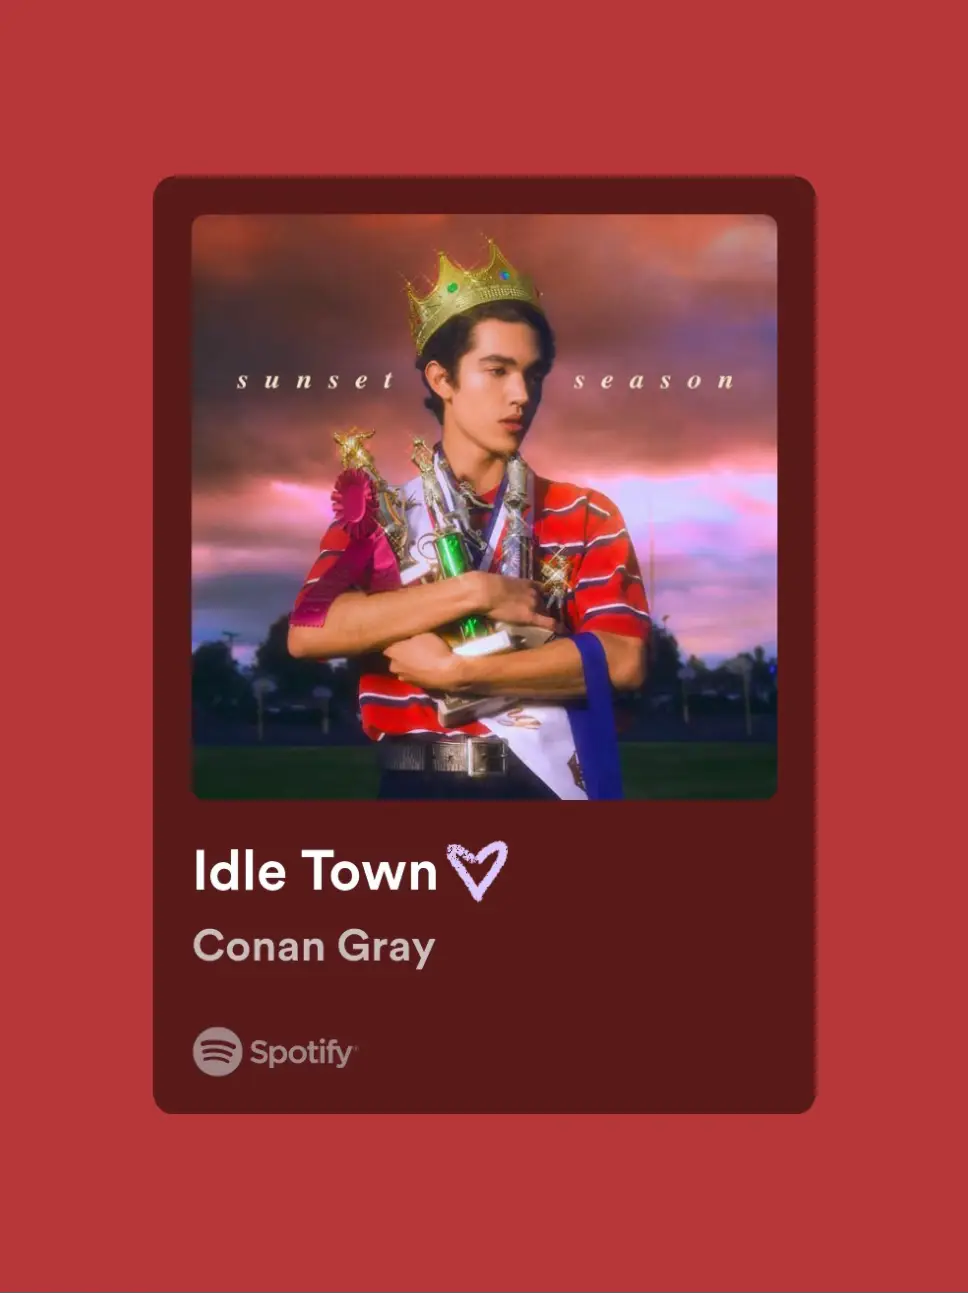  A Spotify ad for Idle Town by Conan Gray.